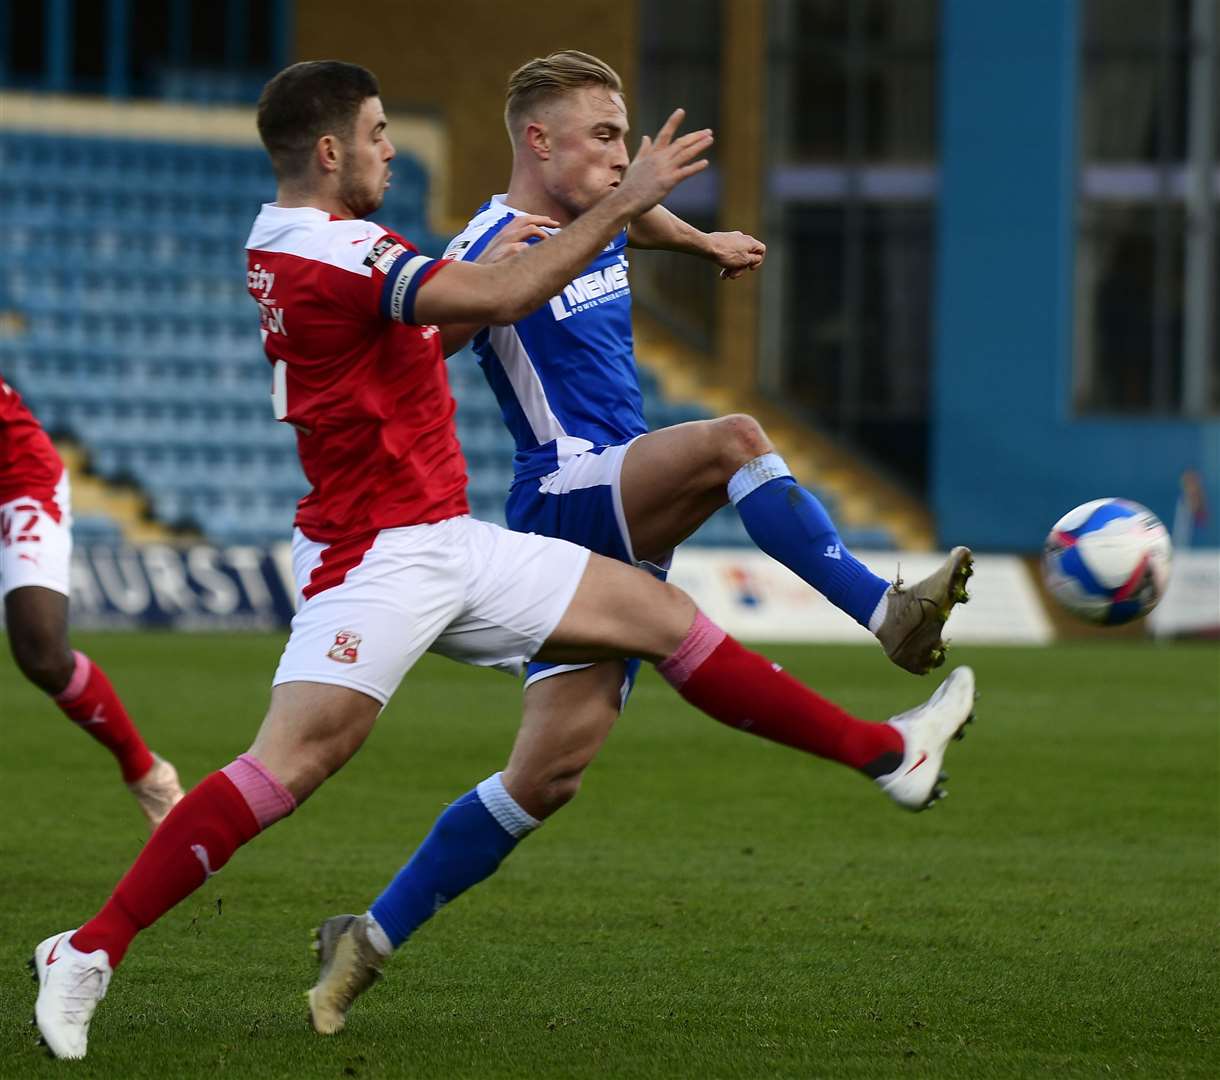 Gillingham's Kyle Dempsey in action against Swindon. Picture: Barry Goodwin (43420951)